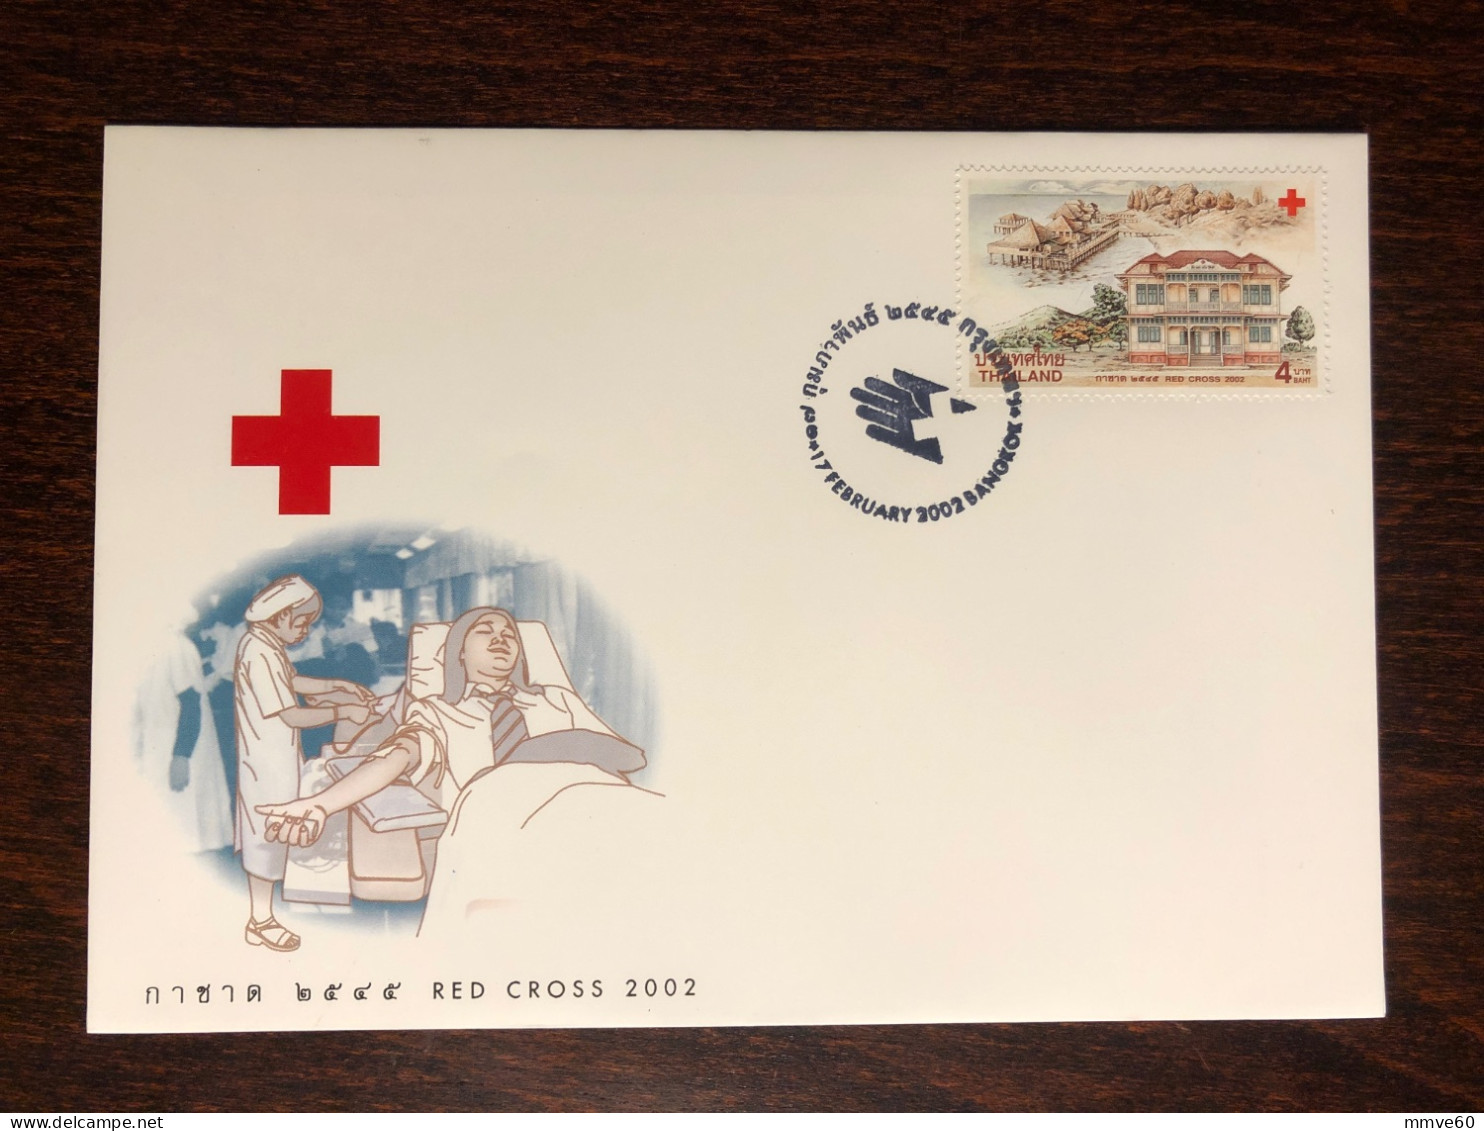 THAILAND FDC COVER 2002 YEAR RED CROSS HOSPITAL HEALTH MEDICINE STAMPS - Thailand